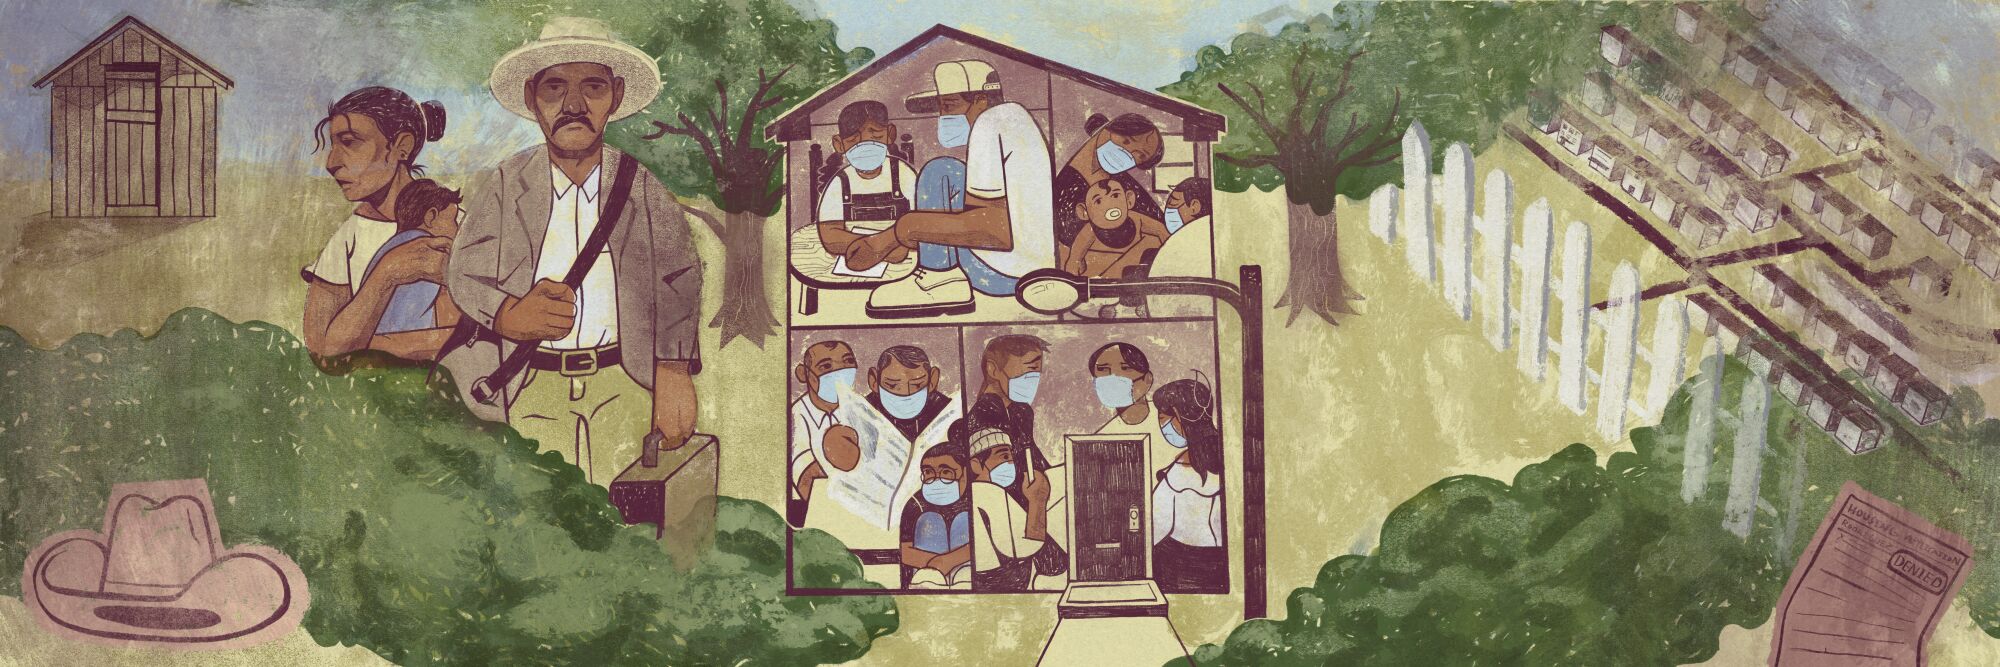 Illustration of people filling a house in middle. Left: a man with luggage and woman and child. Right: homes behind a fence